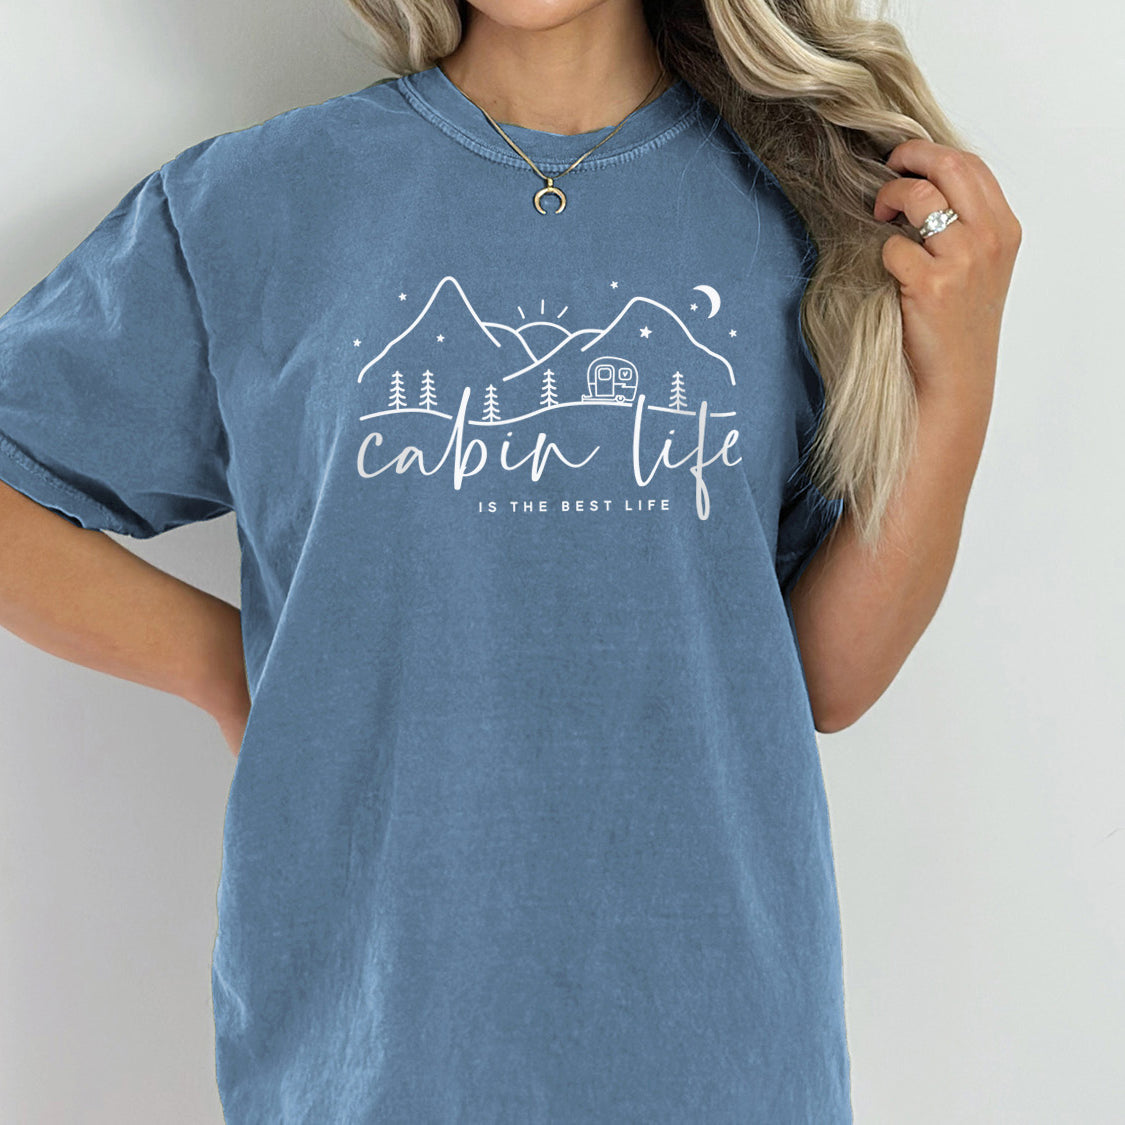 Cabin Life Is The Best Life T-shirt - Outdoor Nature Camping Retro Vintage Design Printed T-Shirt